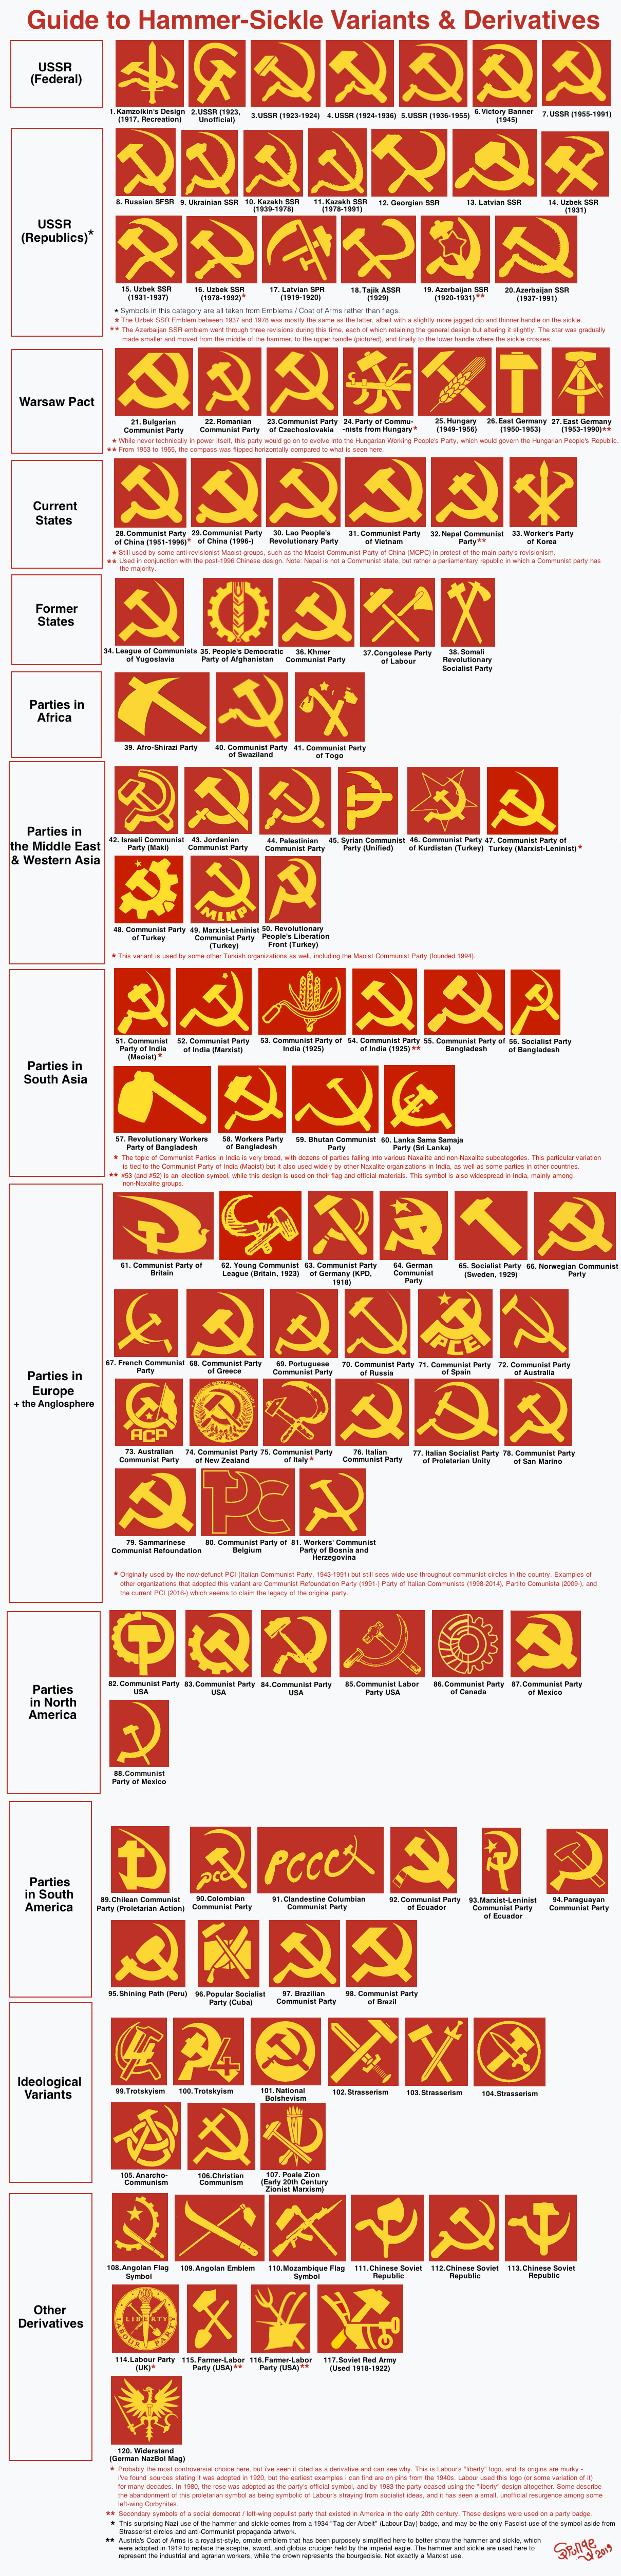 Hammer and sickle variants.png